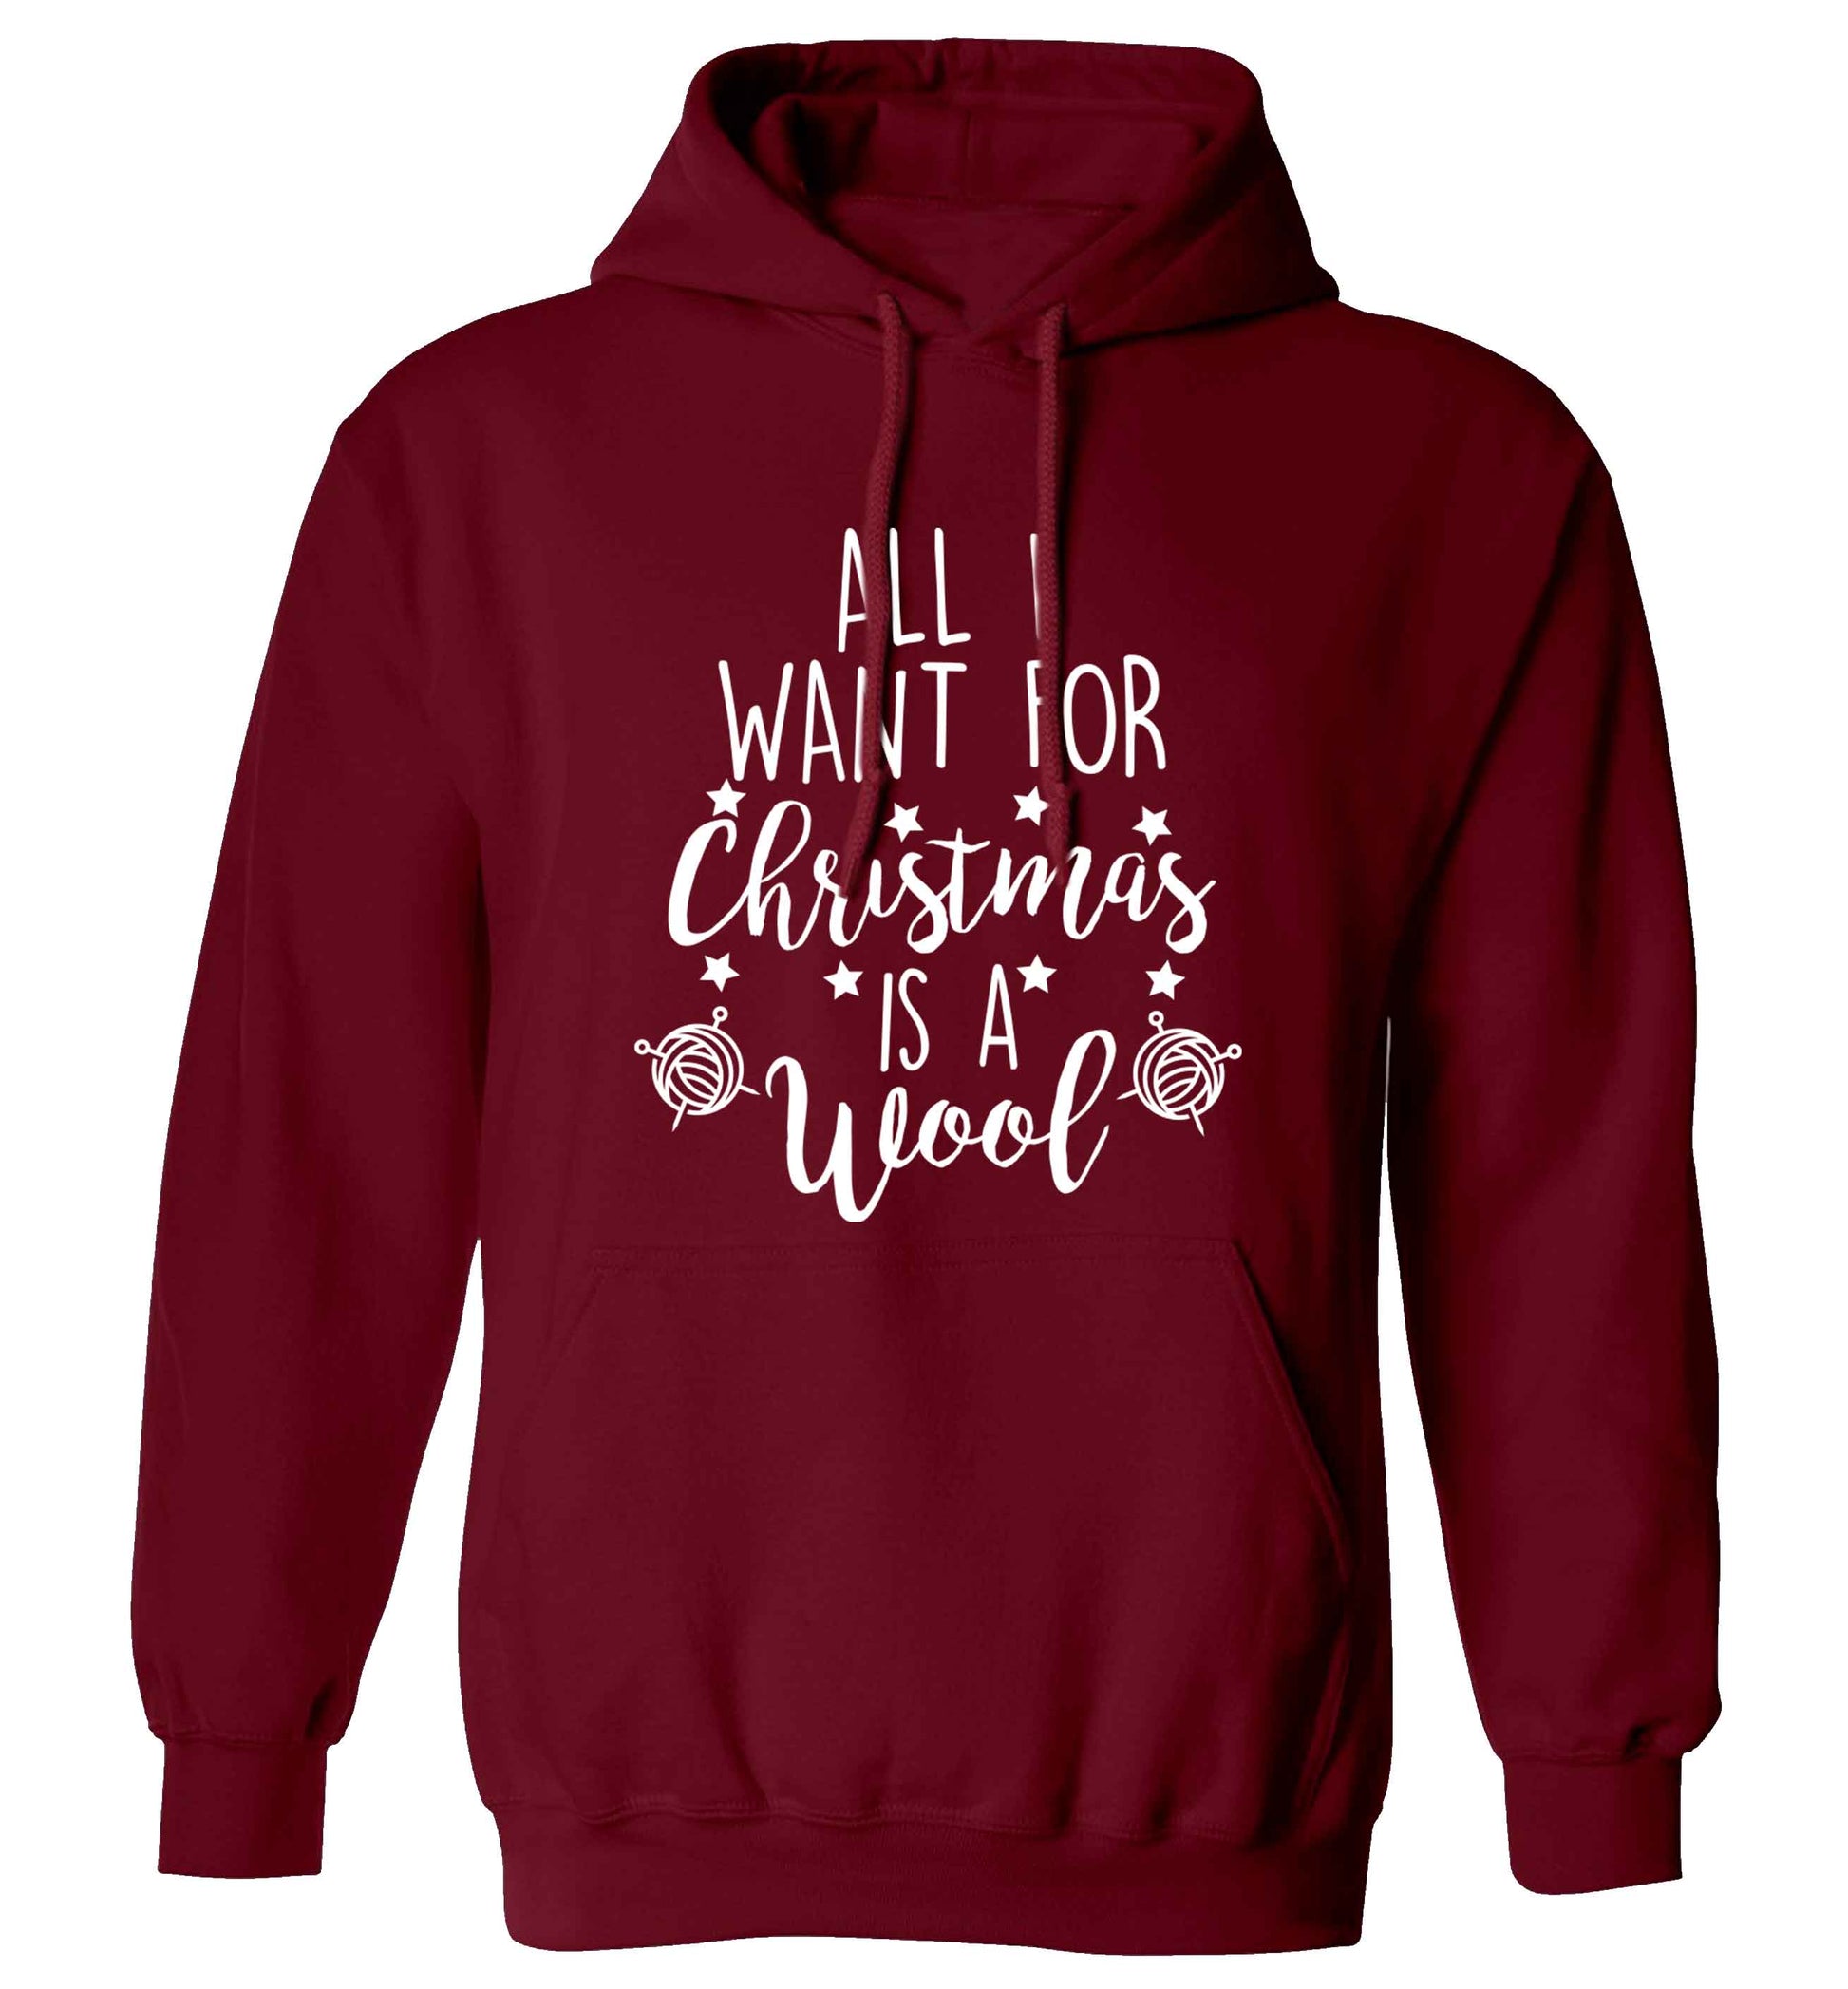 All I want for Christmas is wool! adults unisex maroon hoodie 2XL